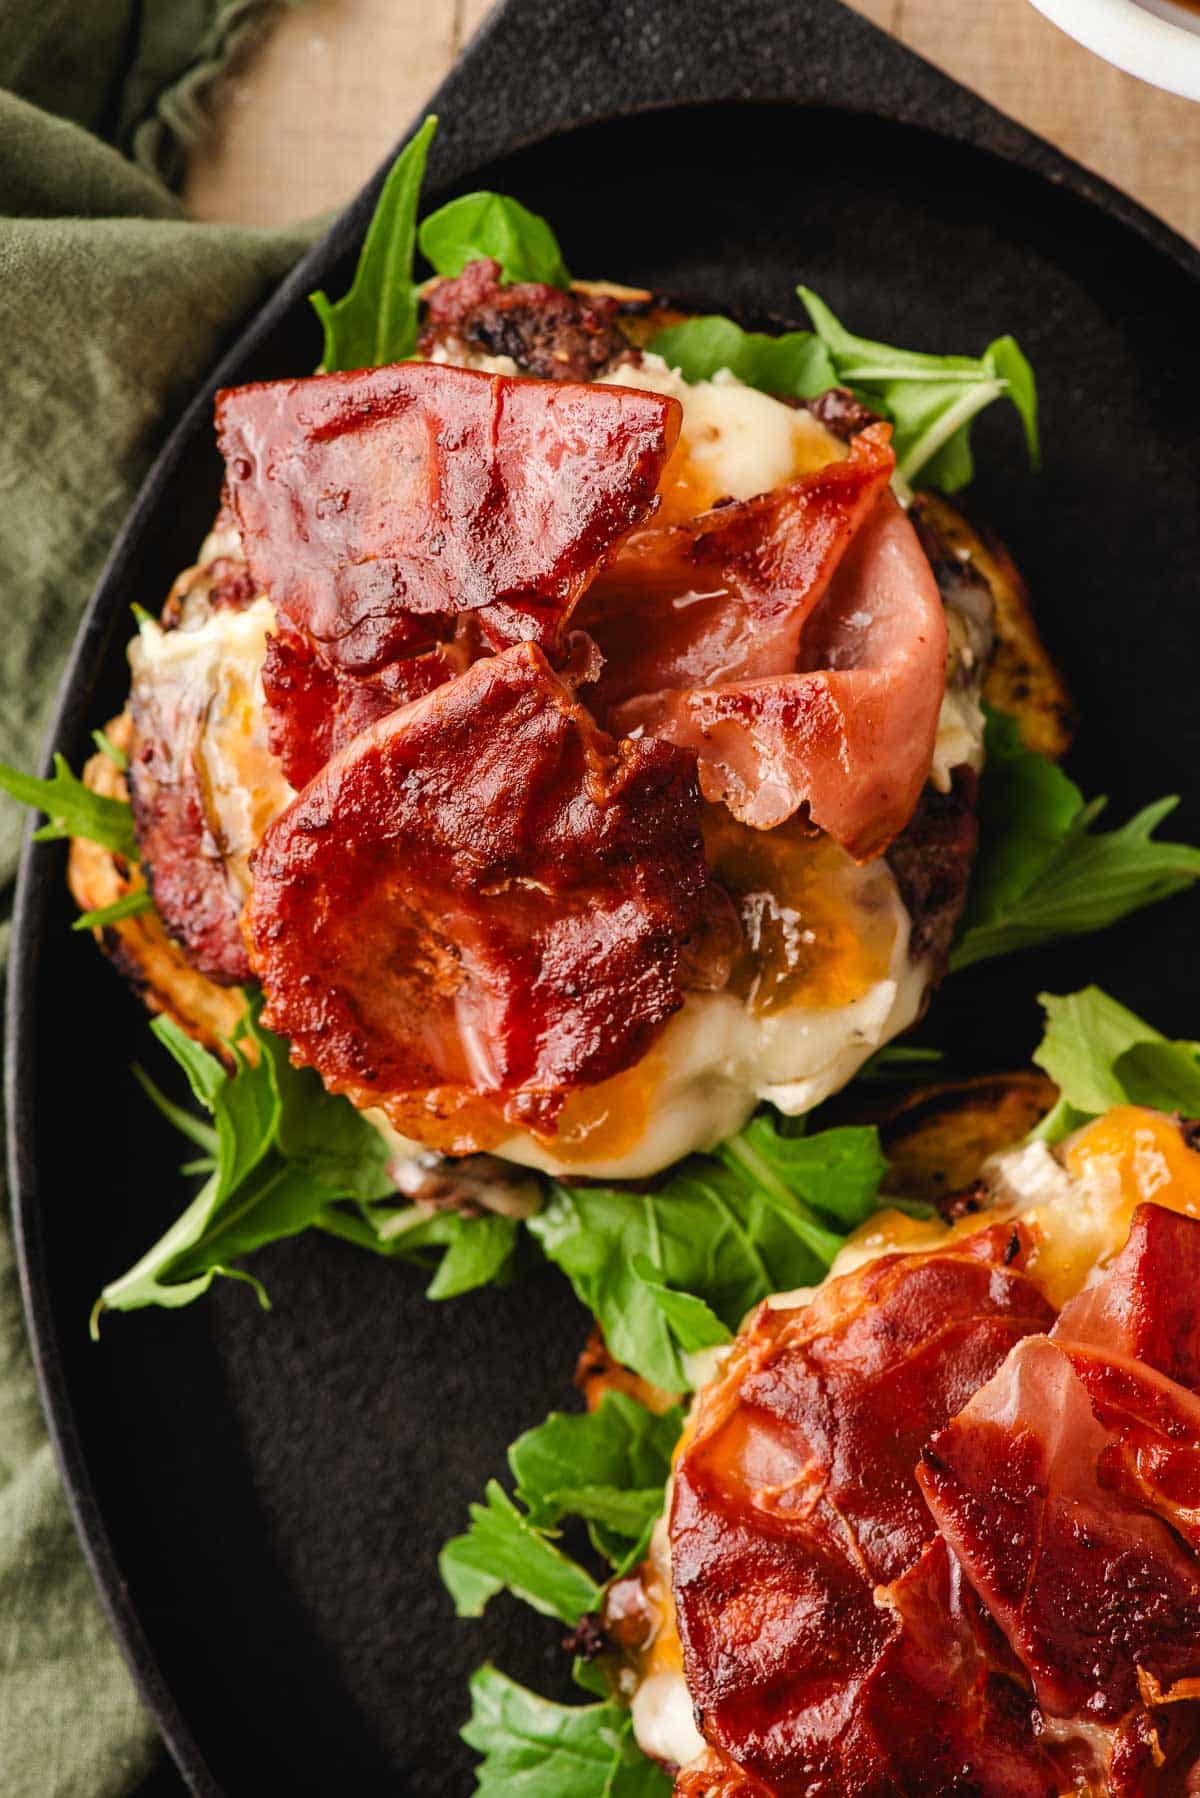 Brie burger topped with crispy prosciutto.